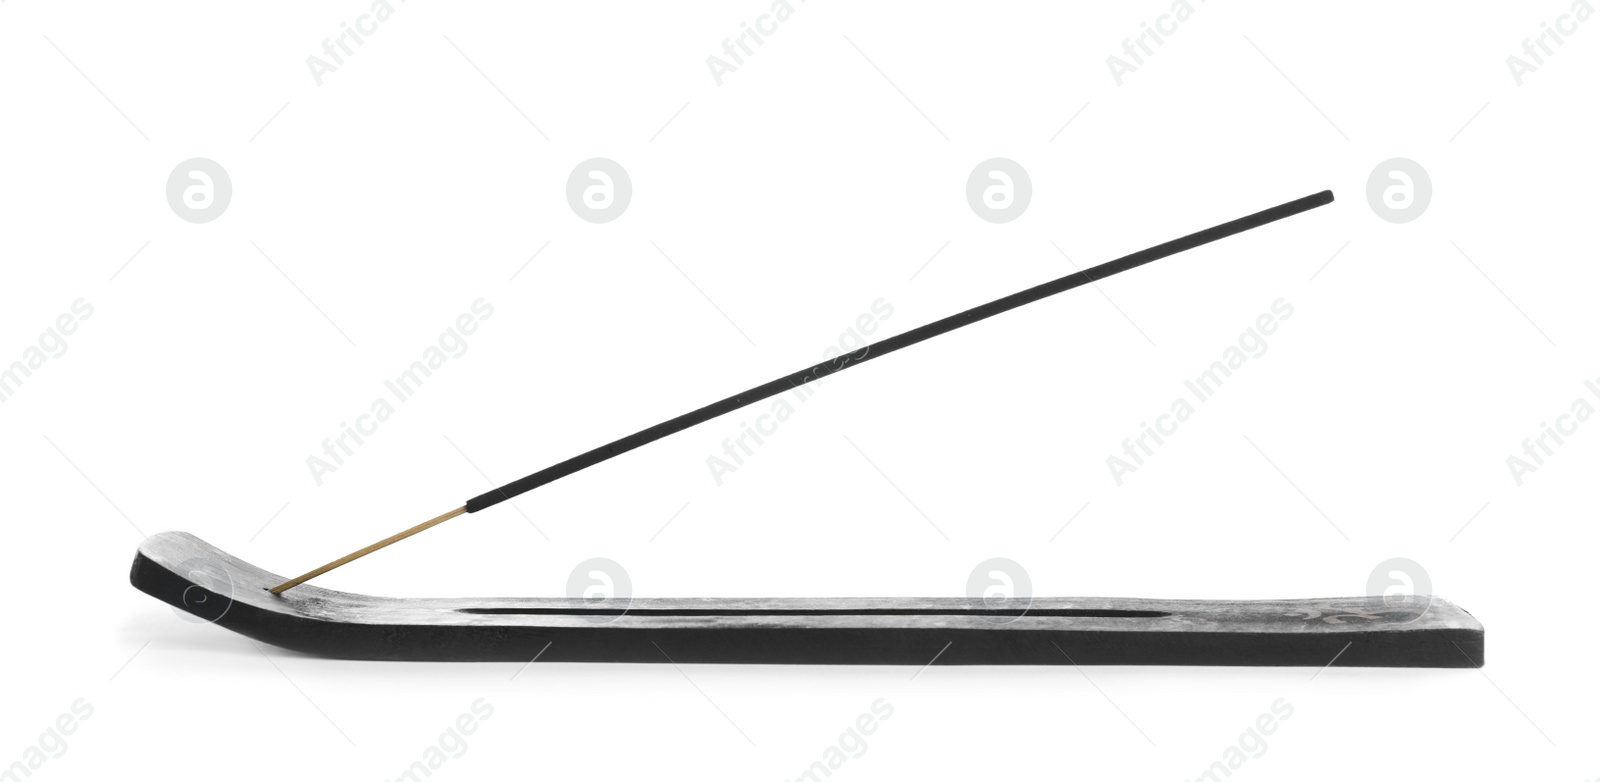 Photo of Incense stick in holder on white background